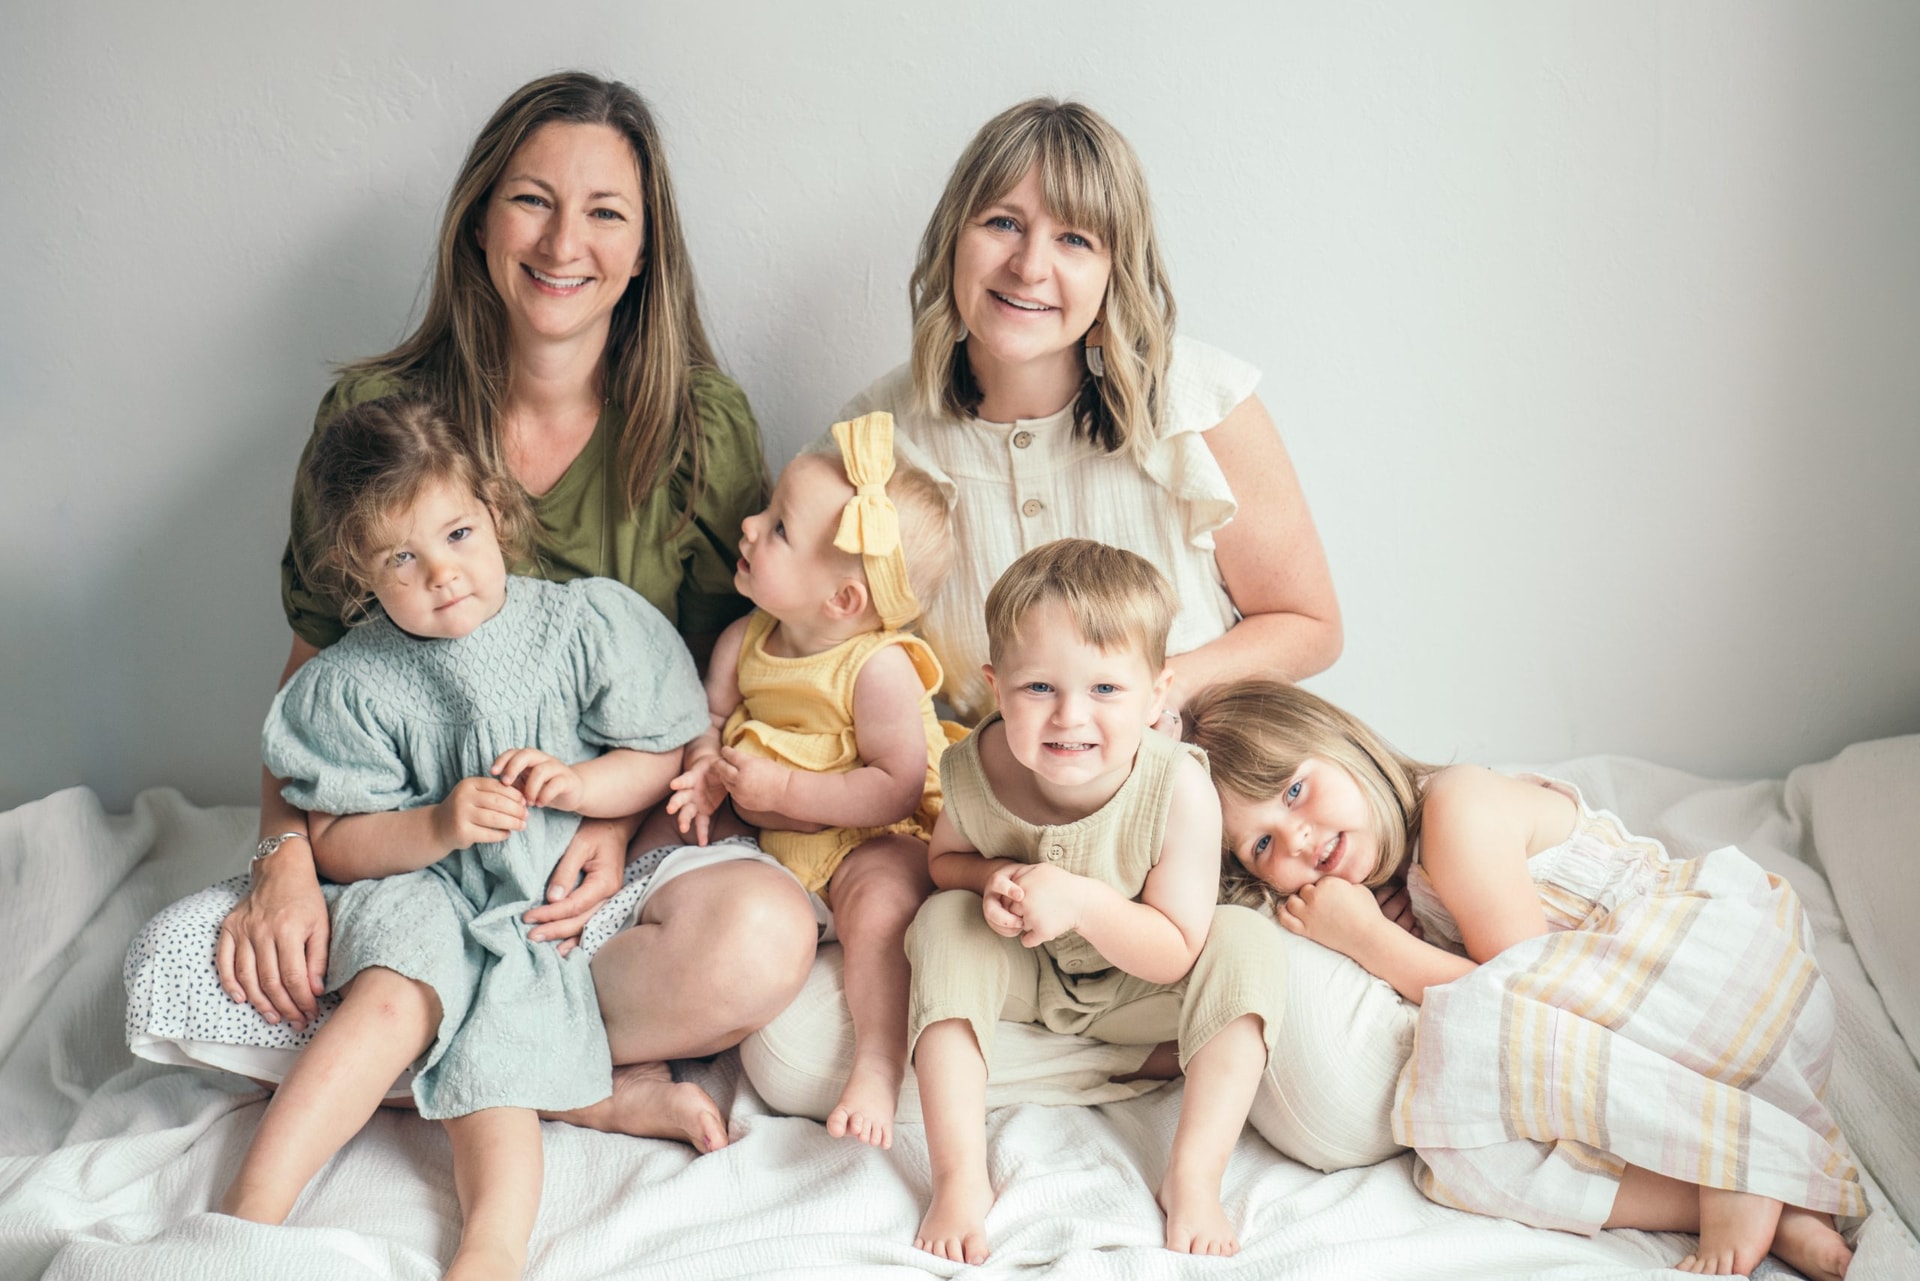 Two moms who are the co-founders of the baby book app with their 4 children